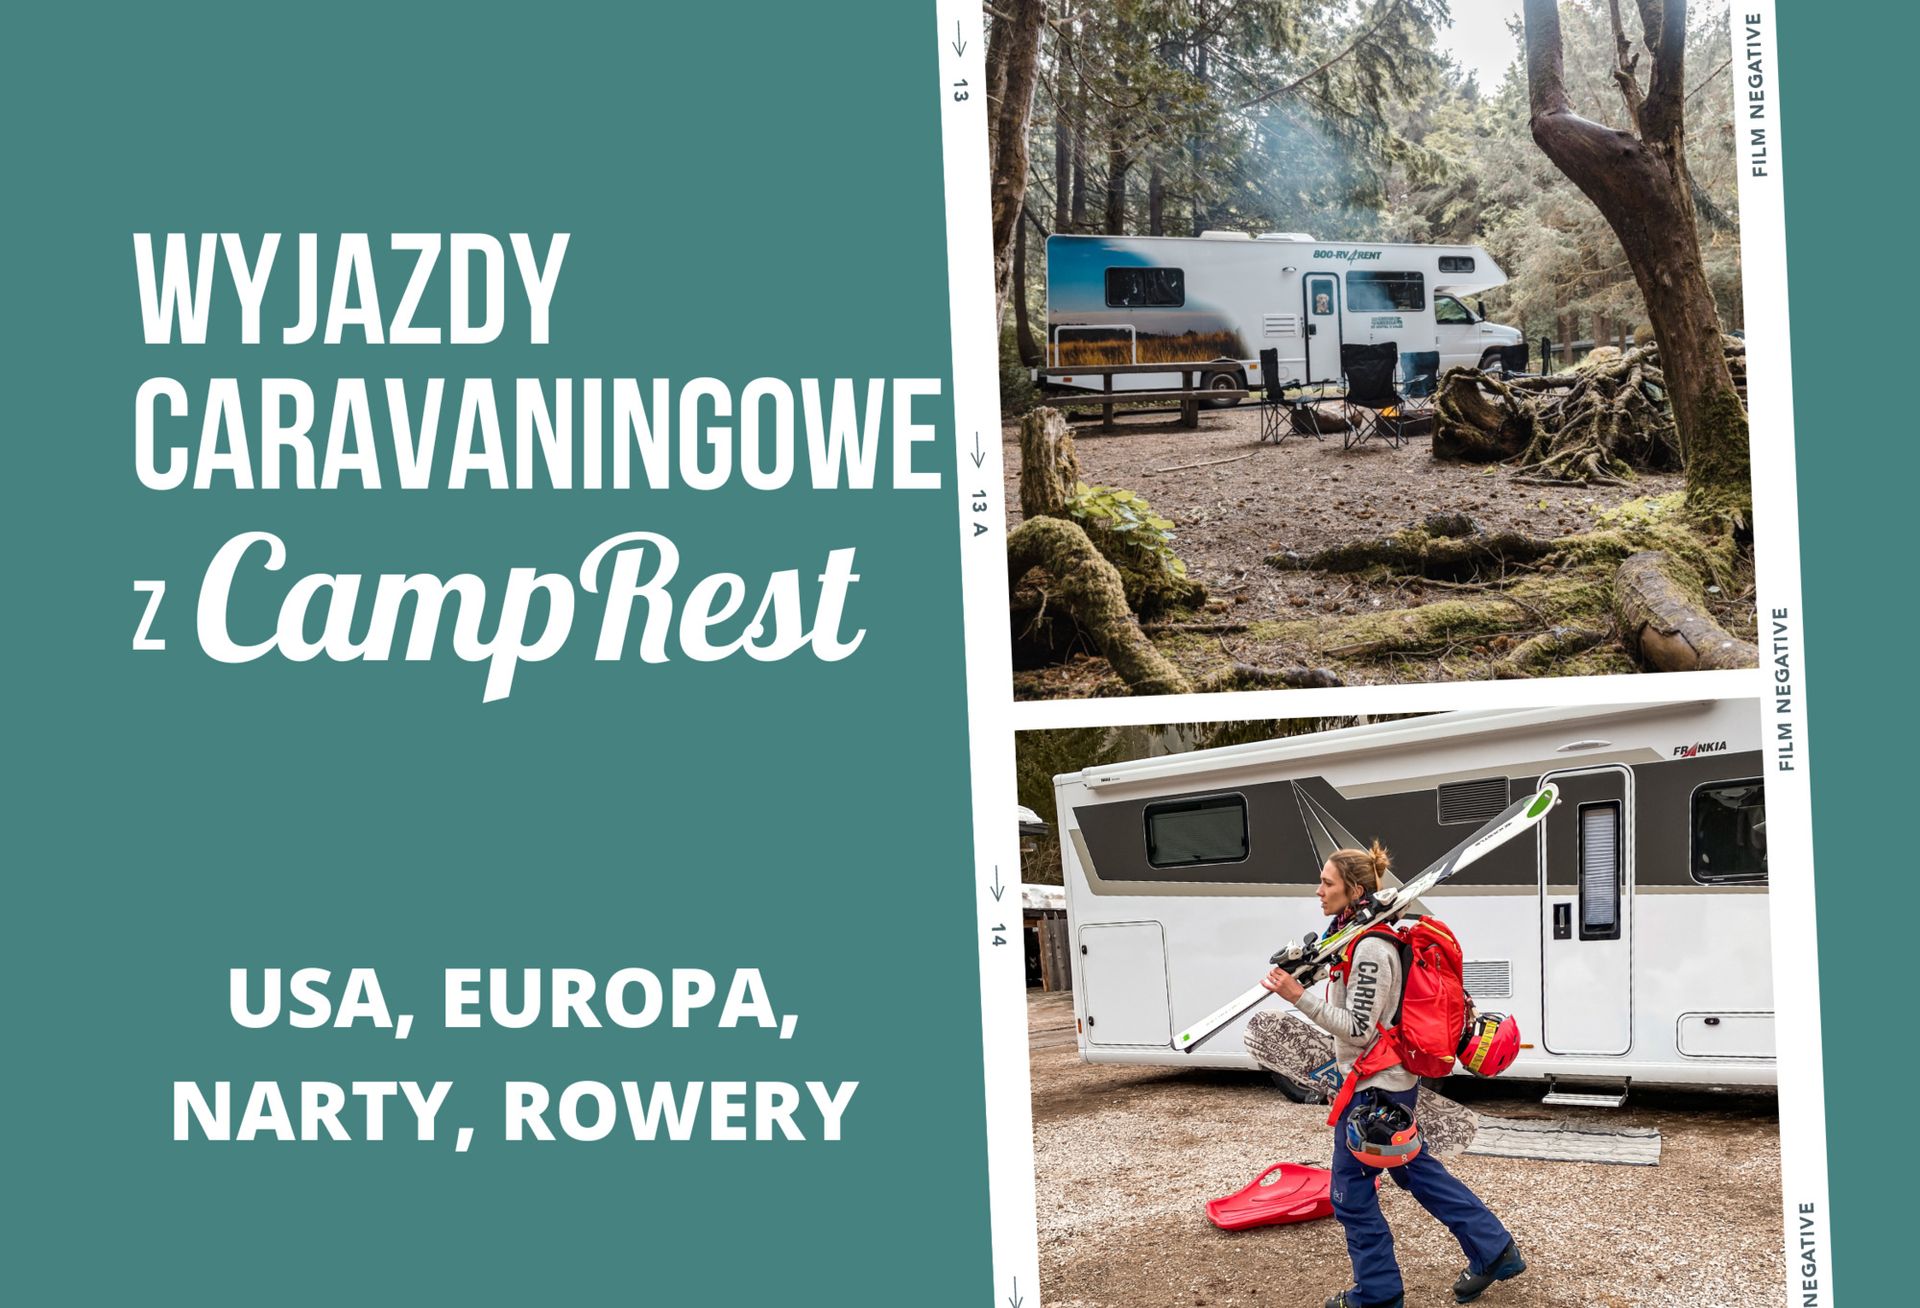 Organized caravanning trips with CampRest – main image